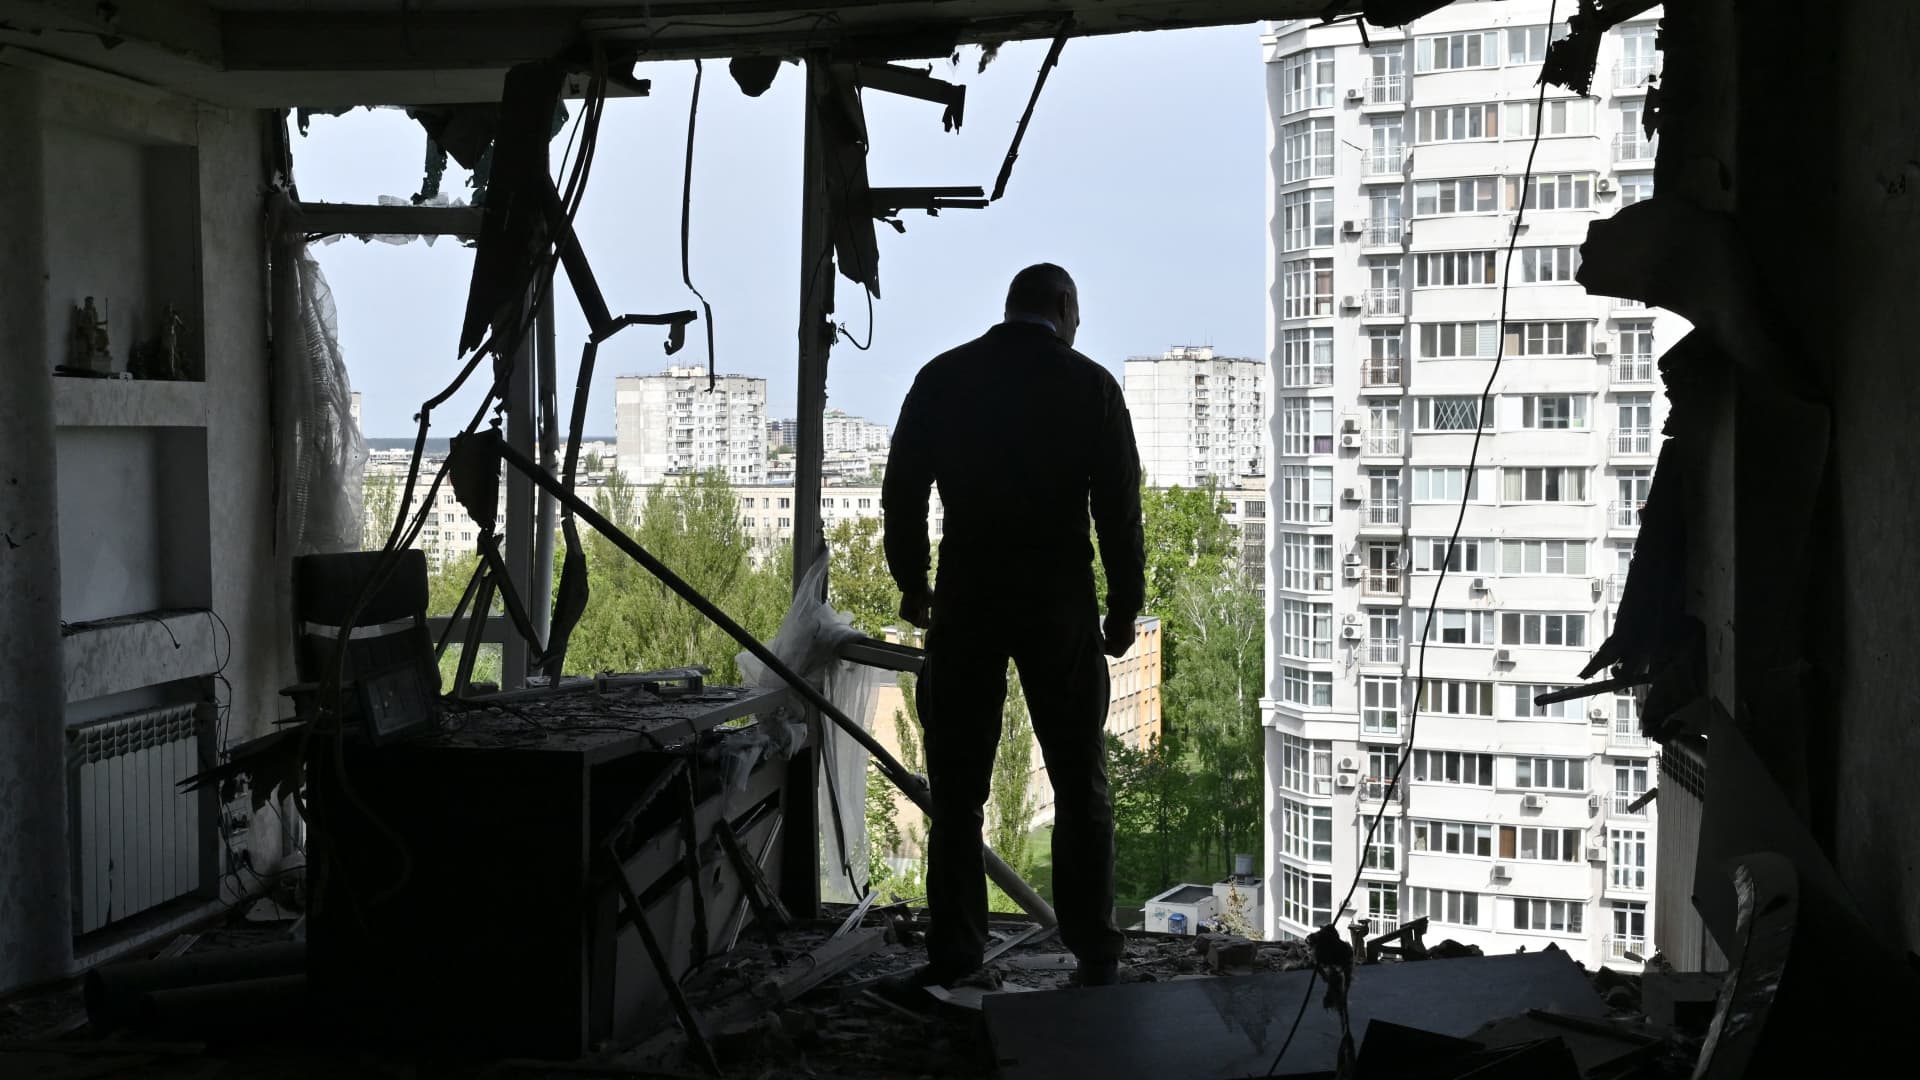 Mayor of the Ukrainian capital Kyiv, Vitali Klitschko, examines high-rise residential building damaged by remains of a shot down Russian drone in Kyiv on May 8, 2023, amid the Russian invasion of Ukraine.